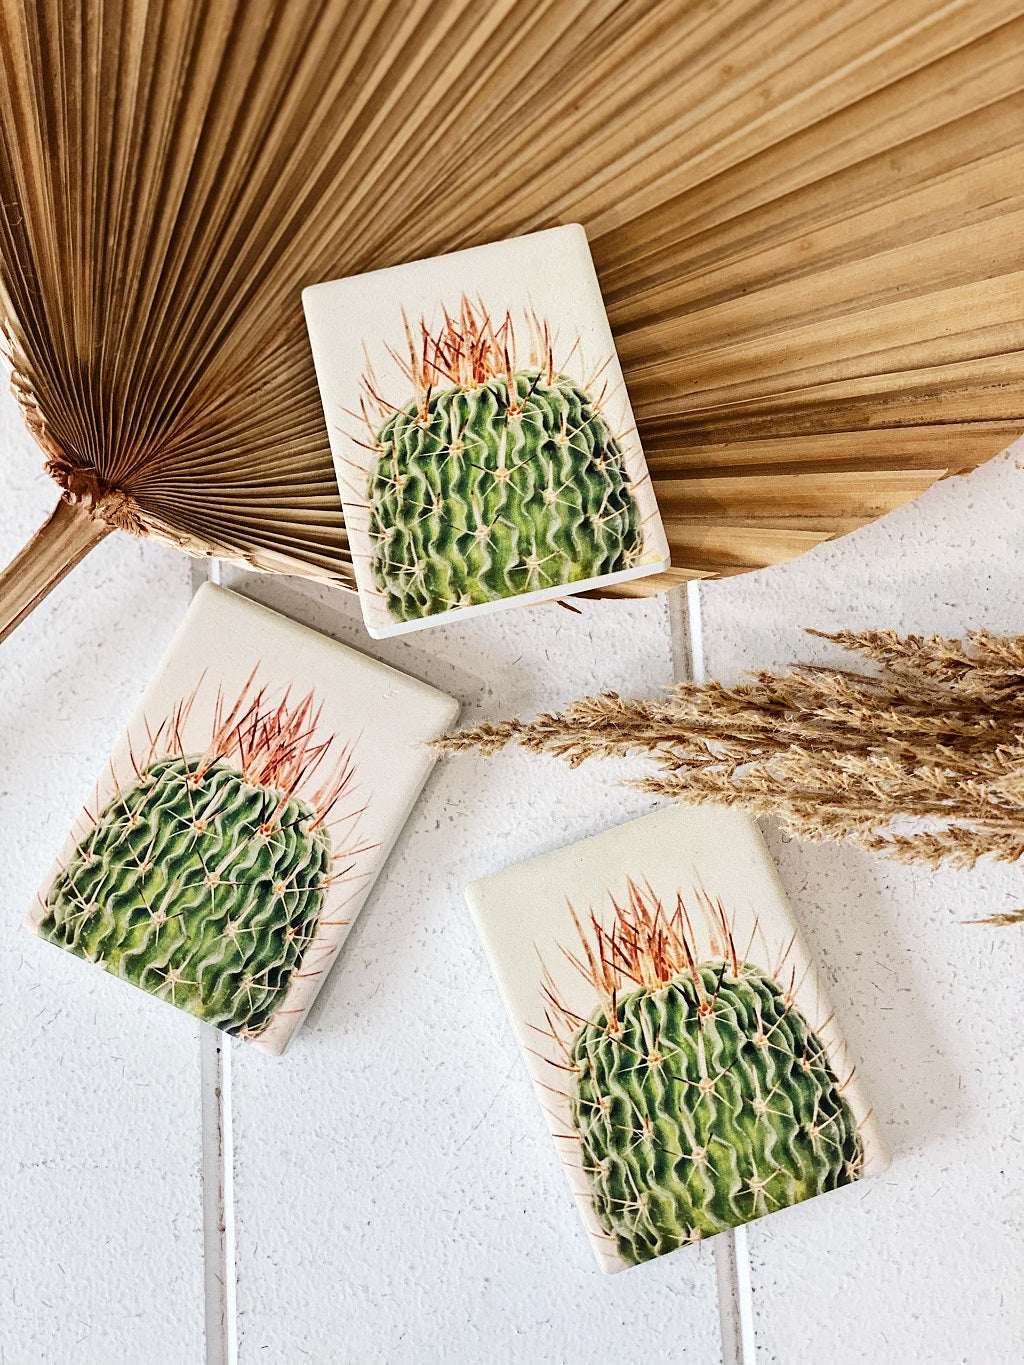 The Natural Oasis “Spiky Ceramic Magnet” is the perfect way to show you care. This magnet is the sweetest gift as a small token of appreciation. 6.2cm x 8.2cm. Spike cactus. Shop online. AfterPay available. Australia wide Shipping | Bliss Gifts &amp; Homewares - Unit 8, 259 Princes Hwy Ulladulla - 0427795959, 44541523